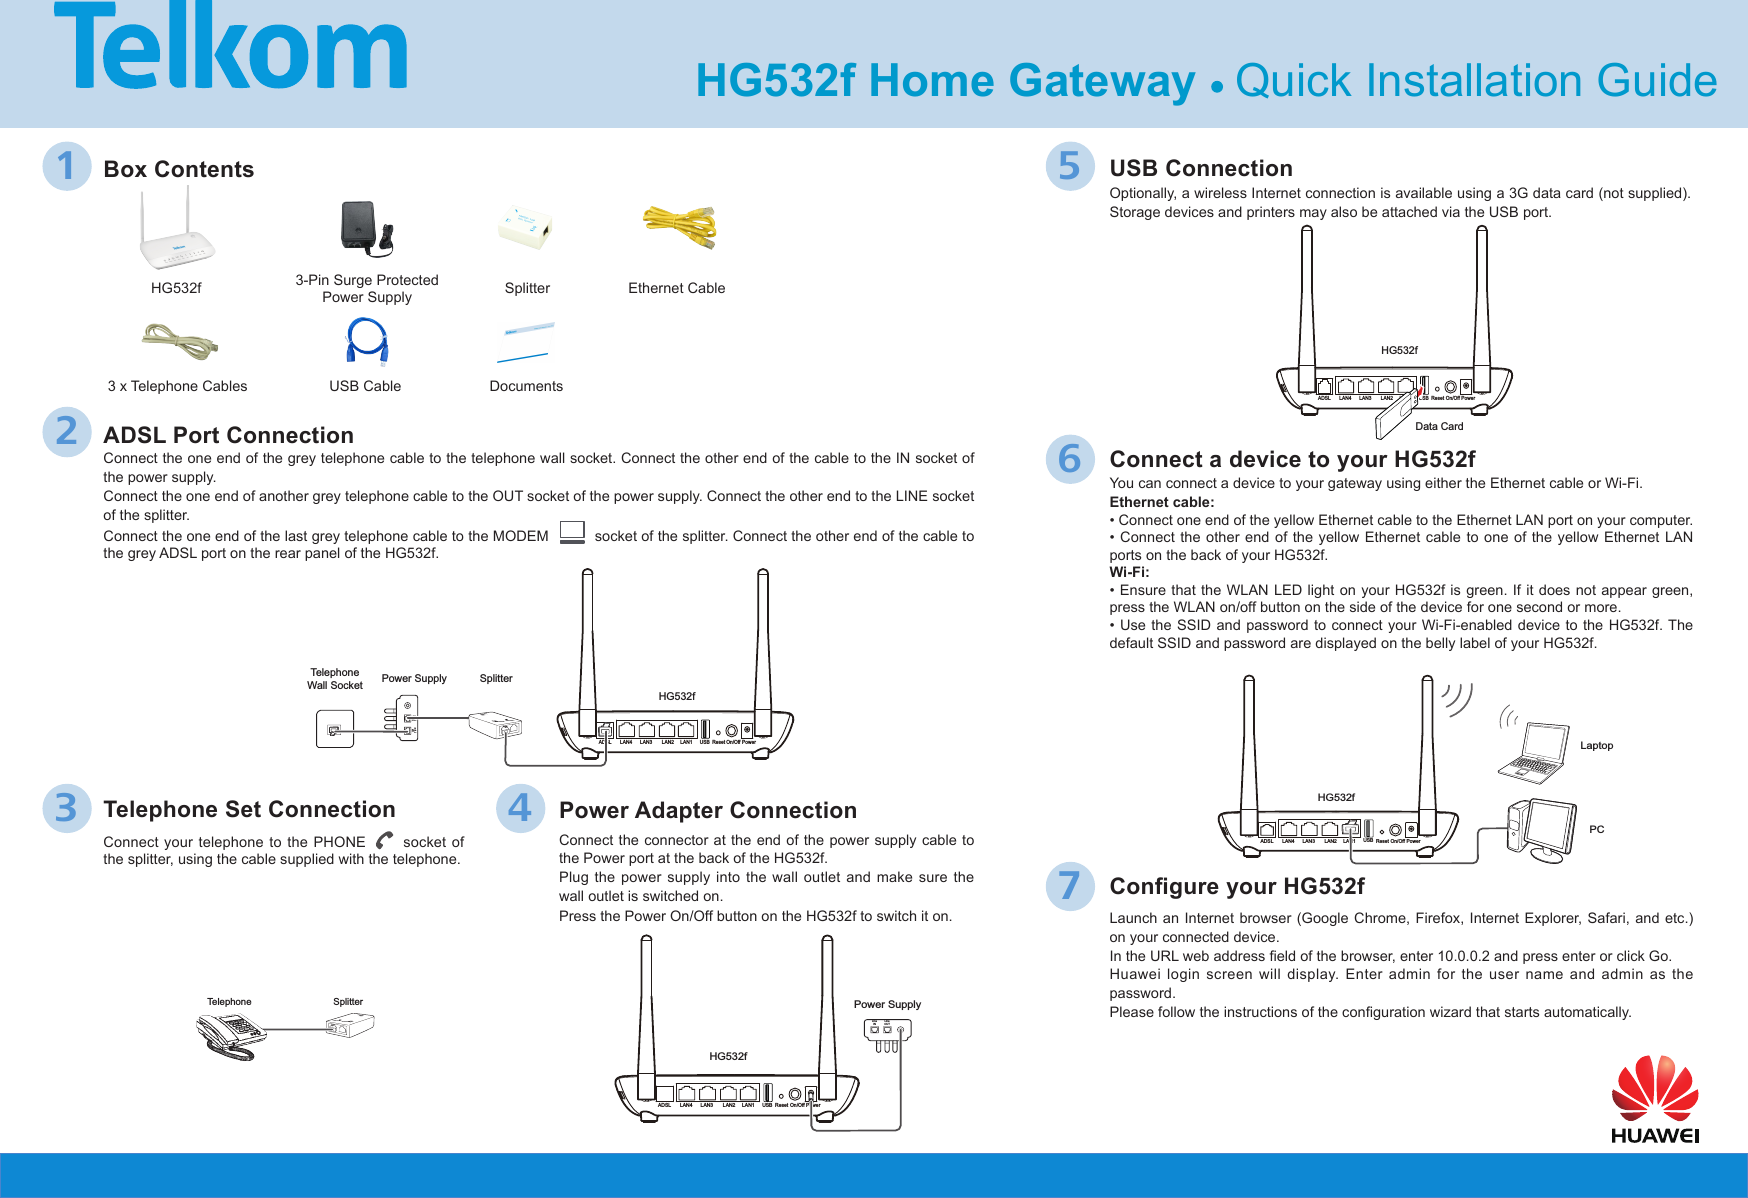 Page 1 of 2 - Huawei  HG532f Quick Installation Guide